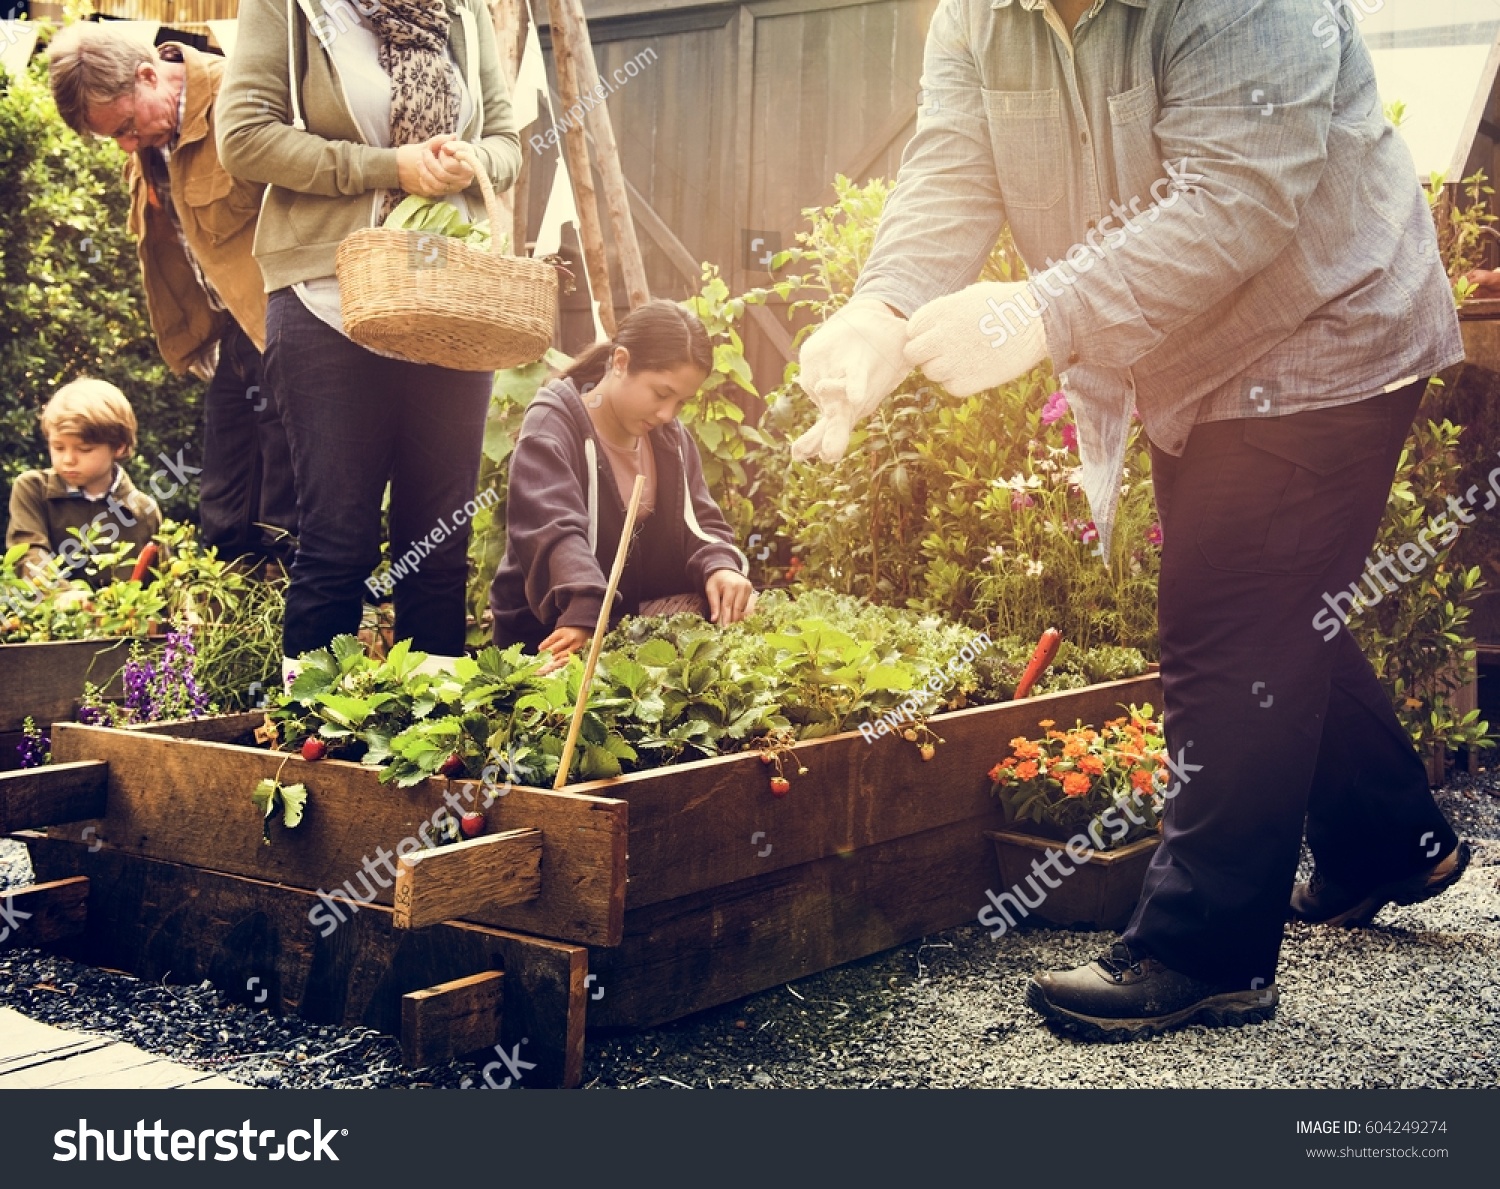 Group of people gardening backyard together #604249274